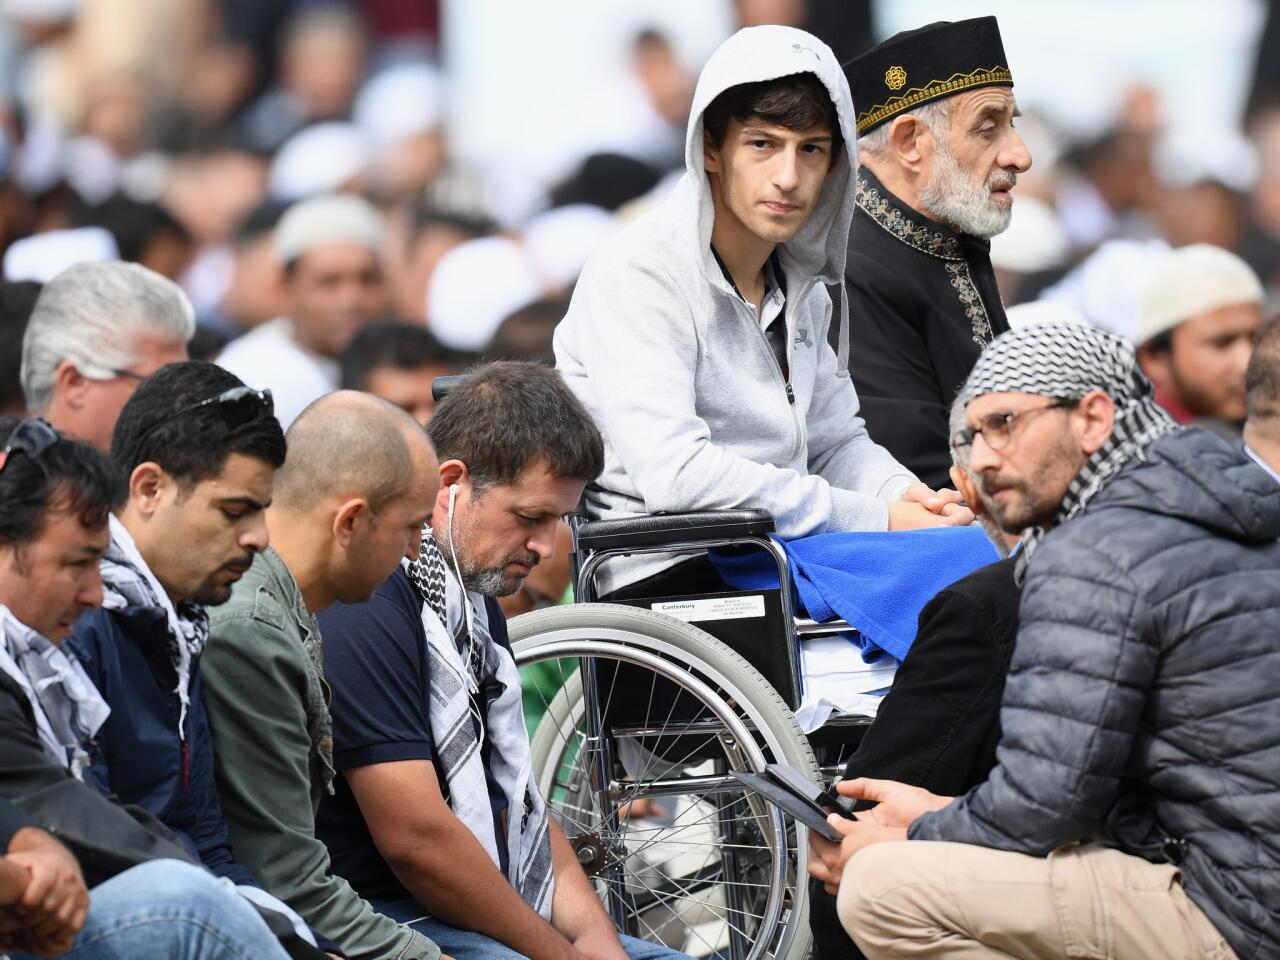 Zahid Mustafa, center, whose father Khaled Mustafa and brother Hamza Mustafa were killed at Al Noor mosque, attends Friday prayers in Hagley Park near Al Noor mosque in Christchurch, New Zealand.